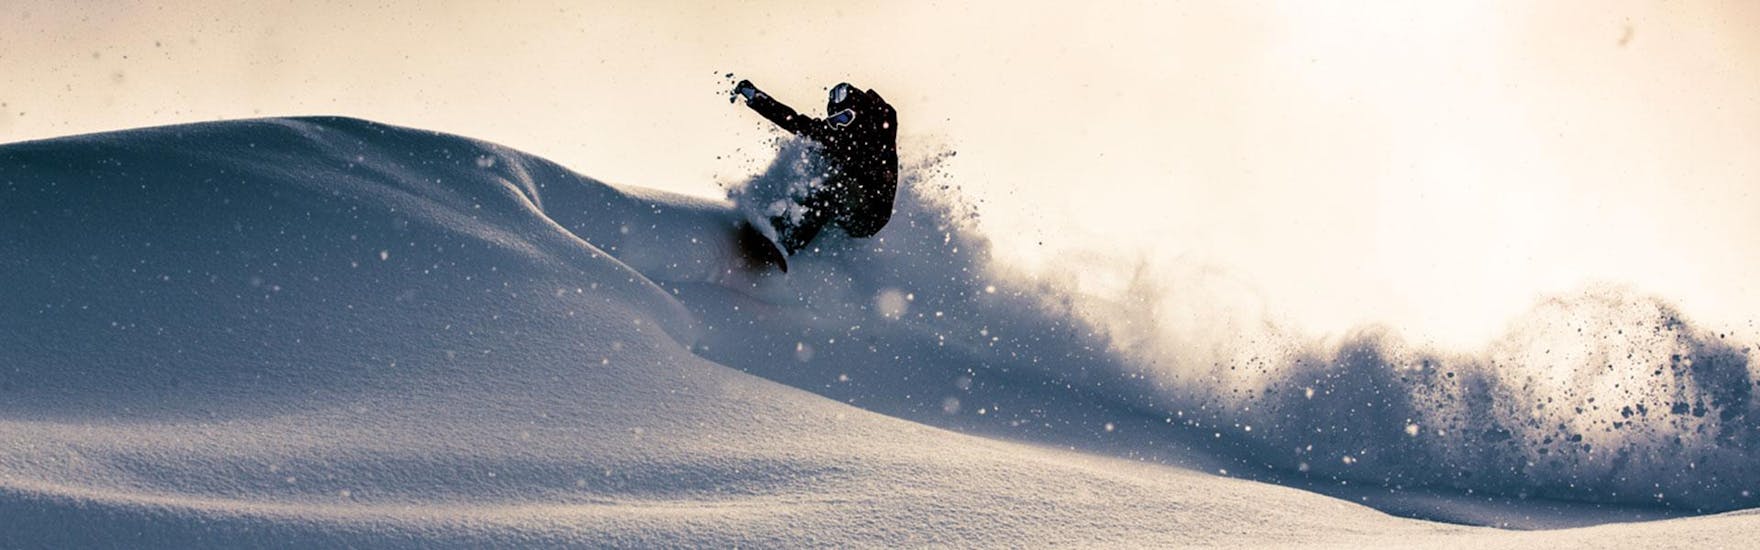 A snowboarder is riding through deep powder snow during his Off-Piste Snowboarding Lessons - All Levels with BOARD.AT.